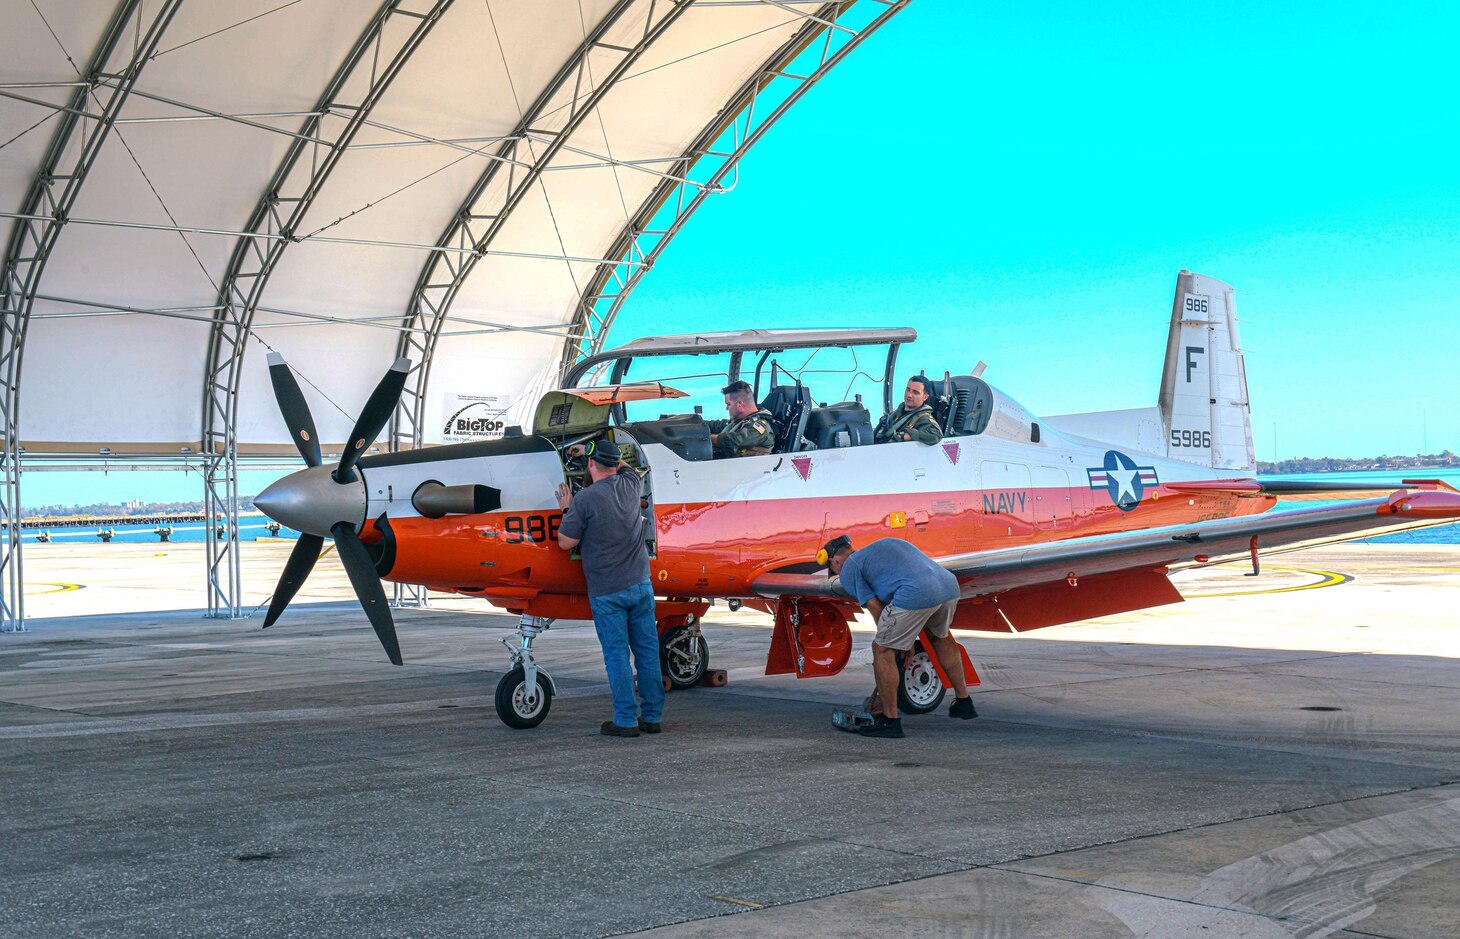 Fleet Readiness Center Southeast’s ground check crew recovers a Navy T-6A aircraft, the first aircraft operated beneath the new Ground Check Huts, after a successful post-ACI Functional Checkflight.